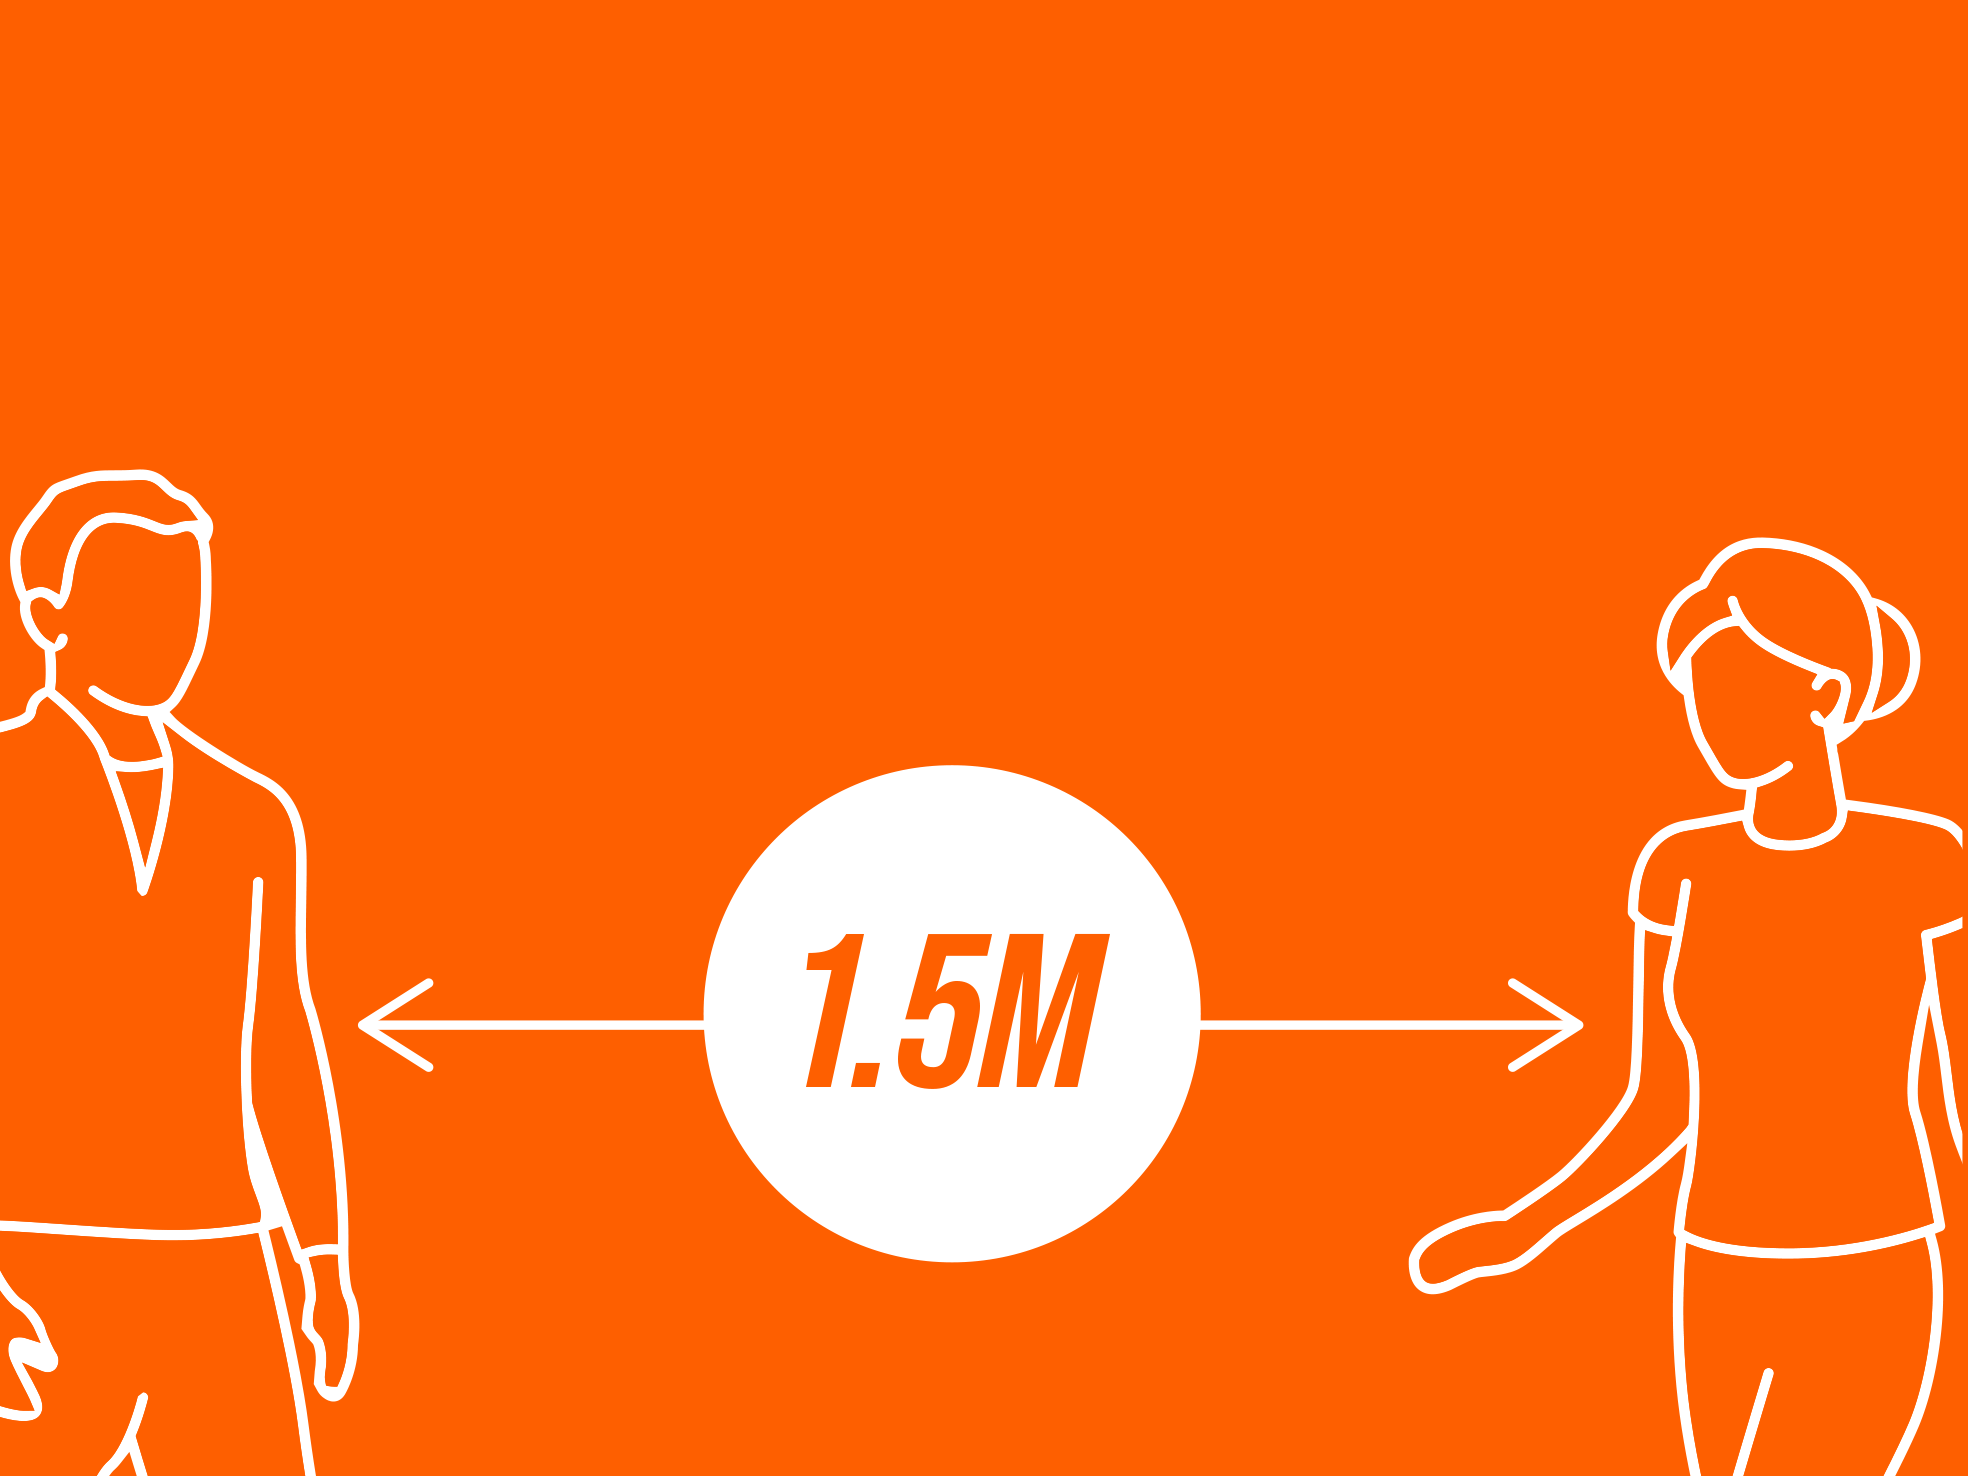 Illustration of man and woman keeping 1.5m apart for COVID-19